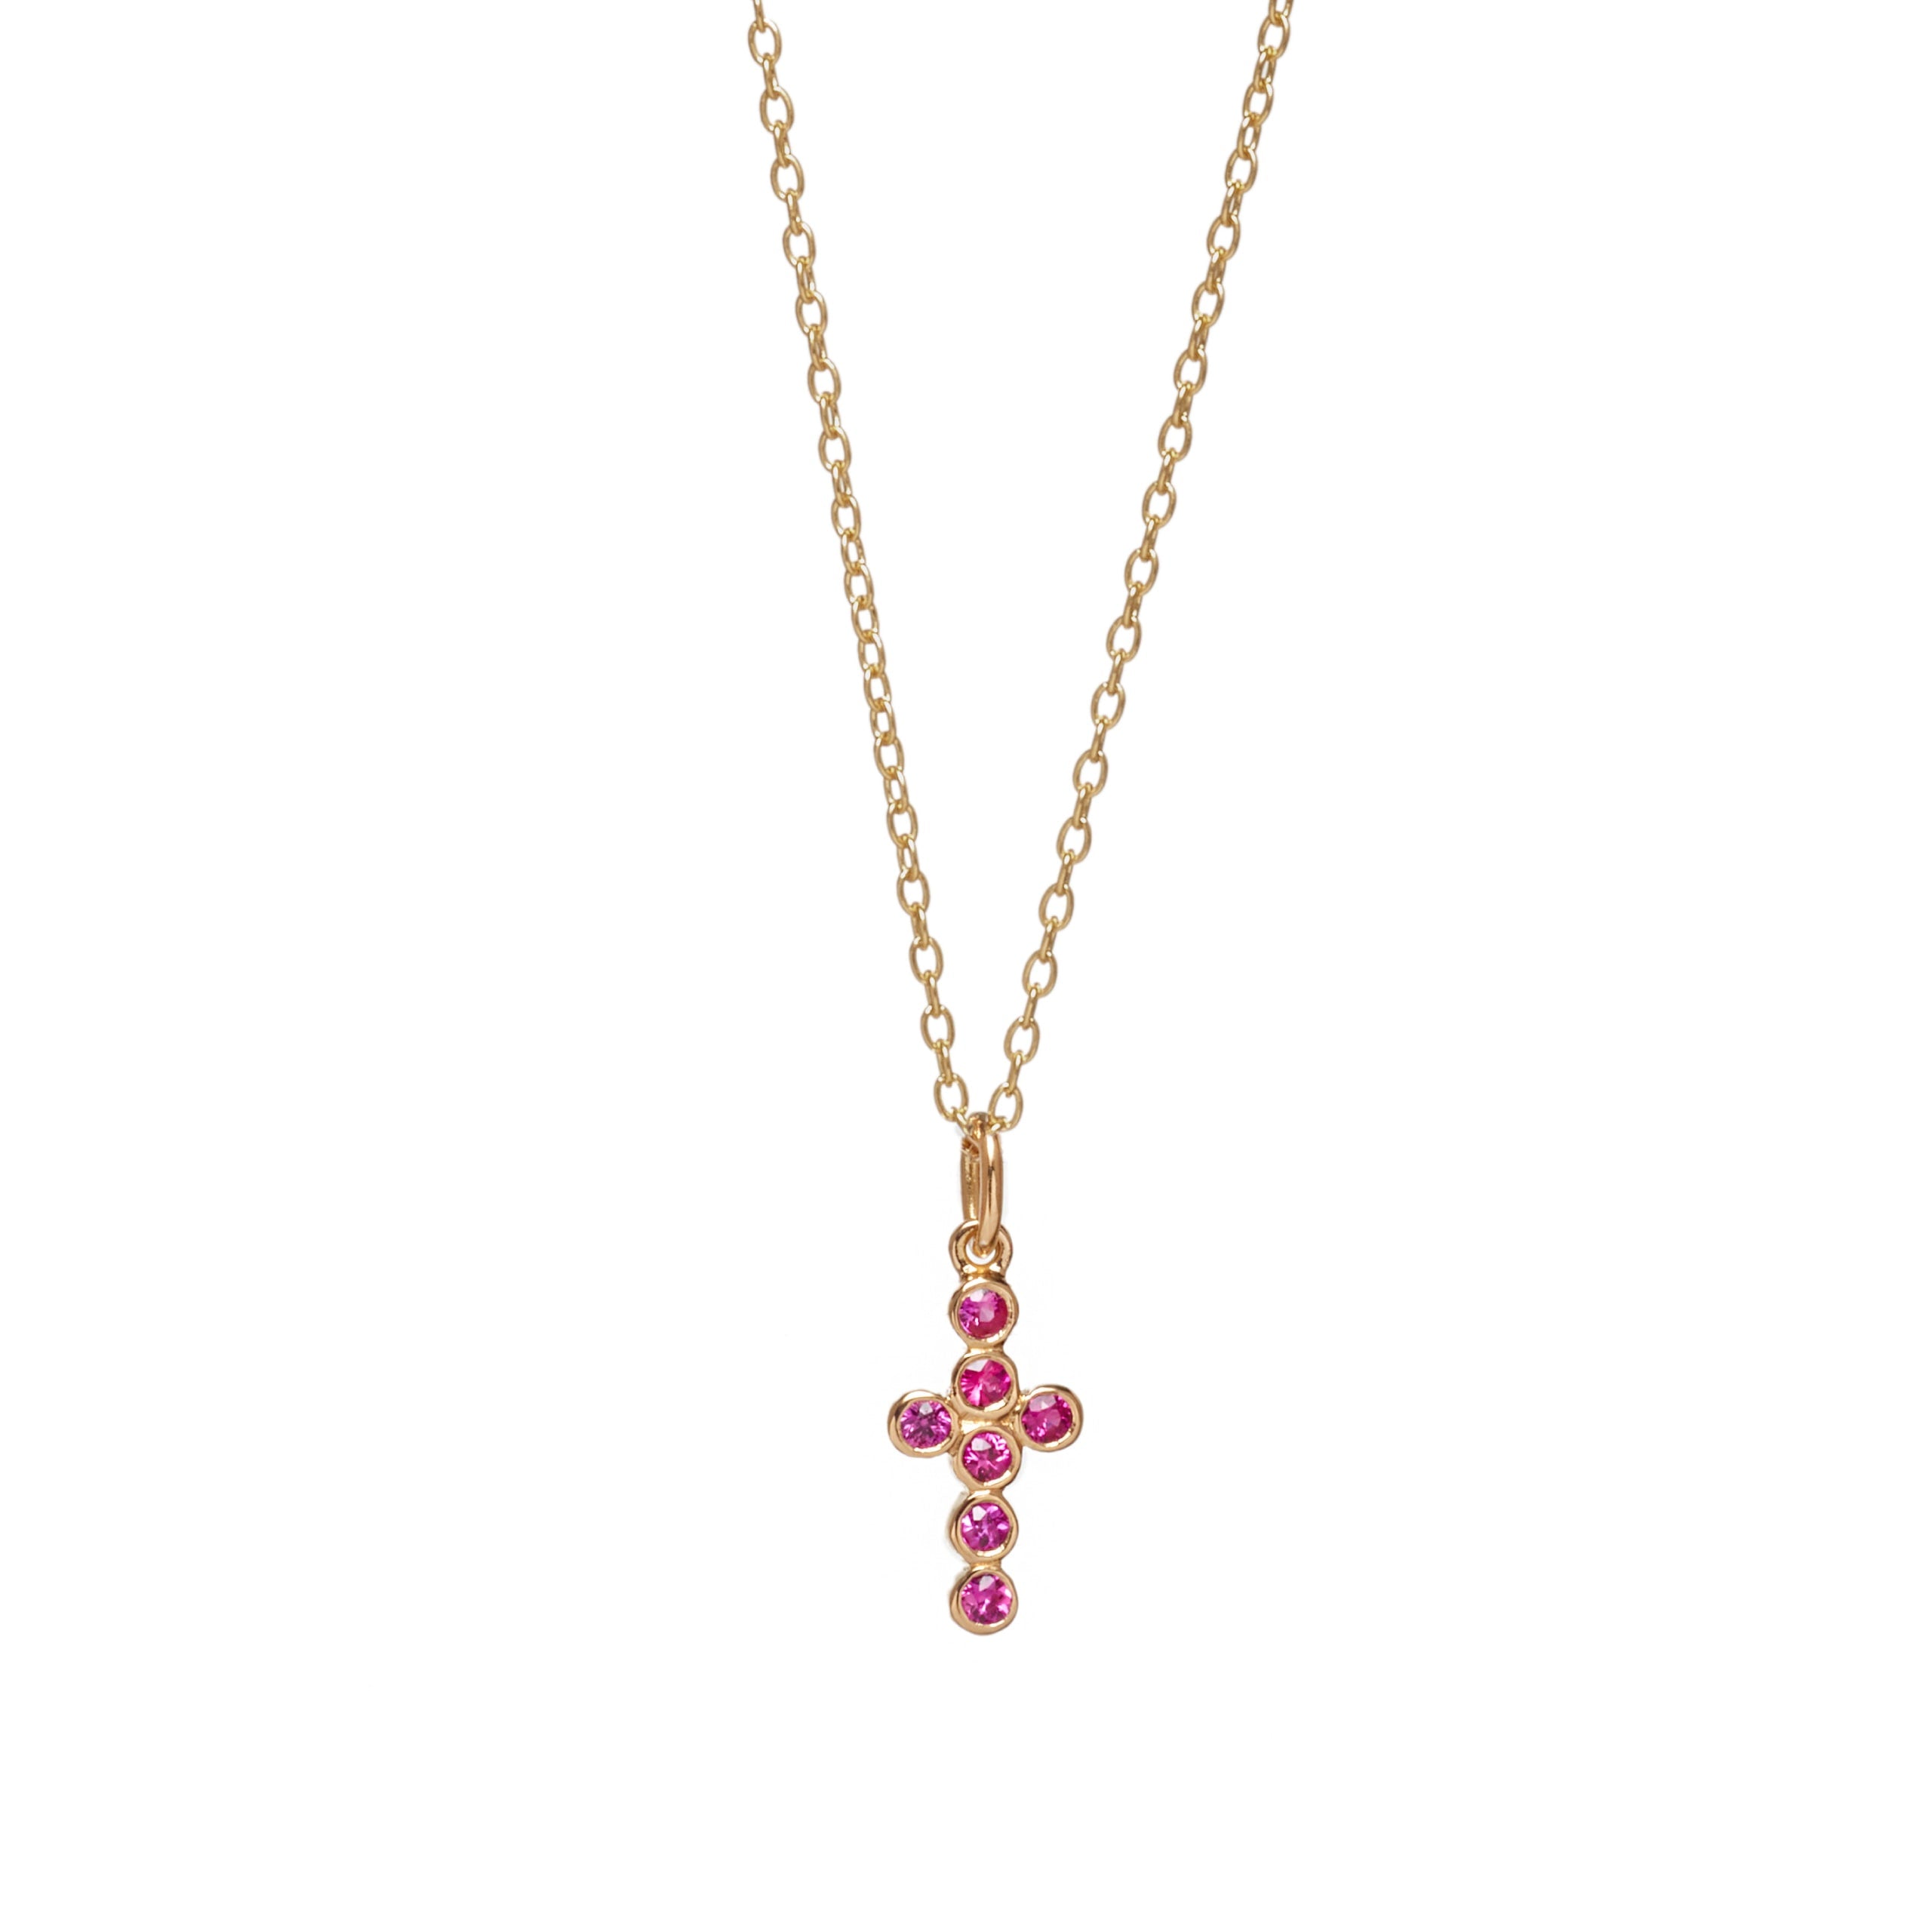 NECKLACE - RUBIES